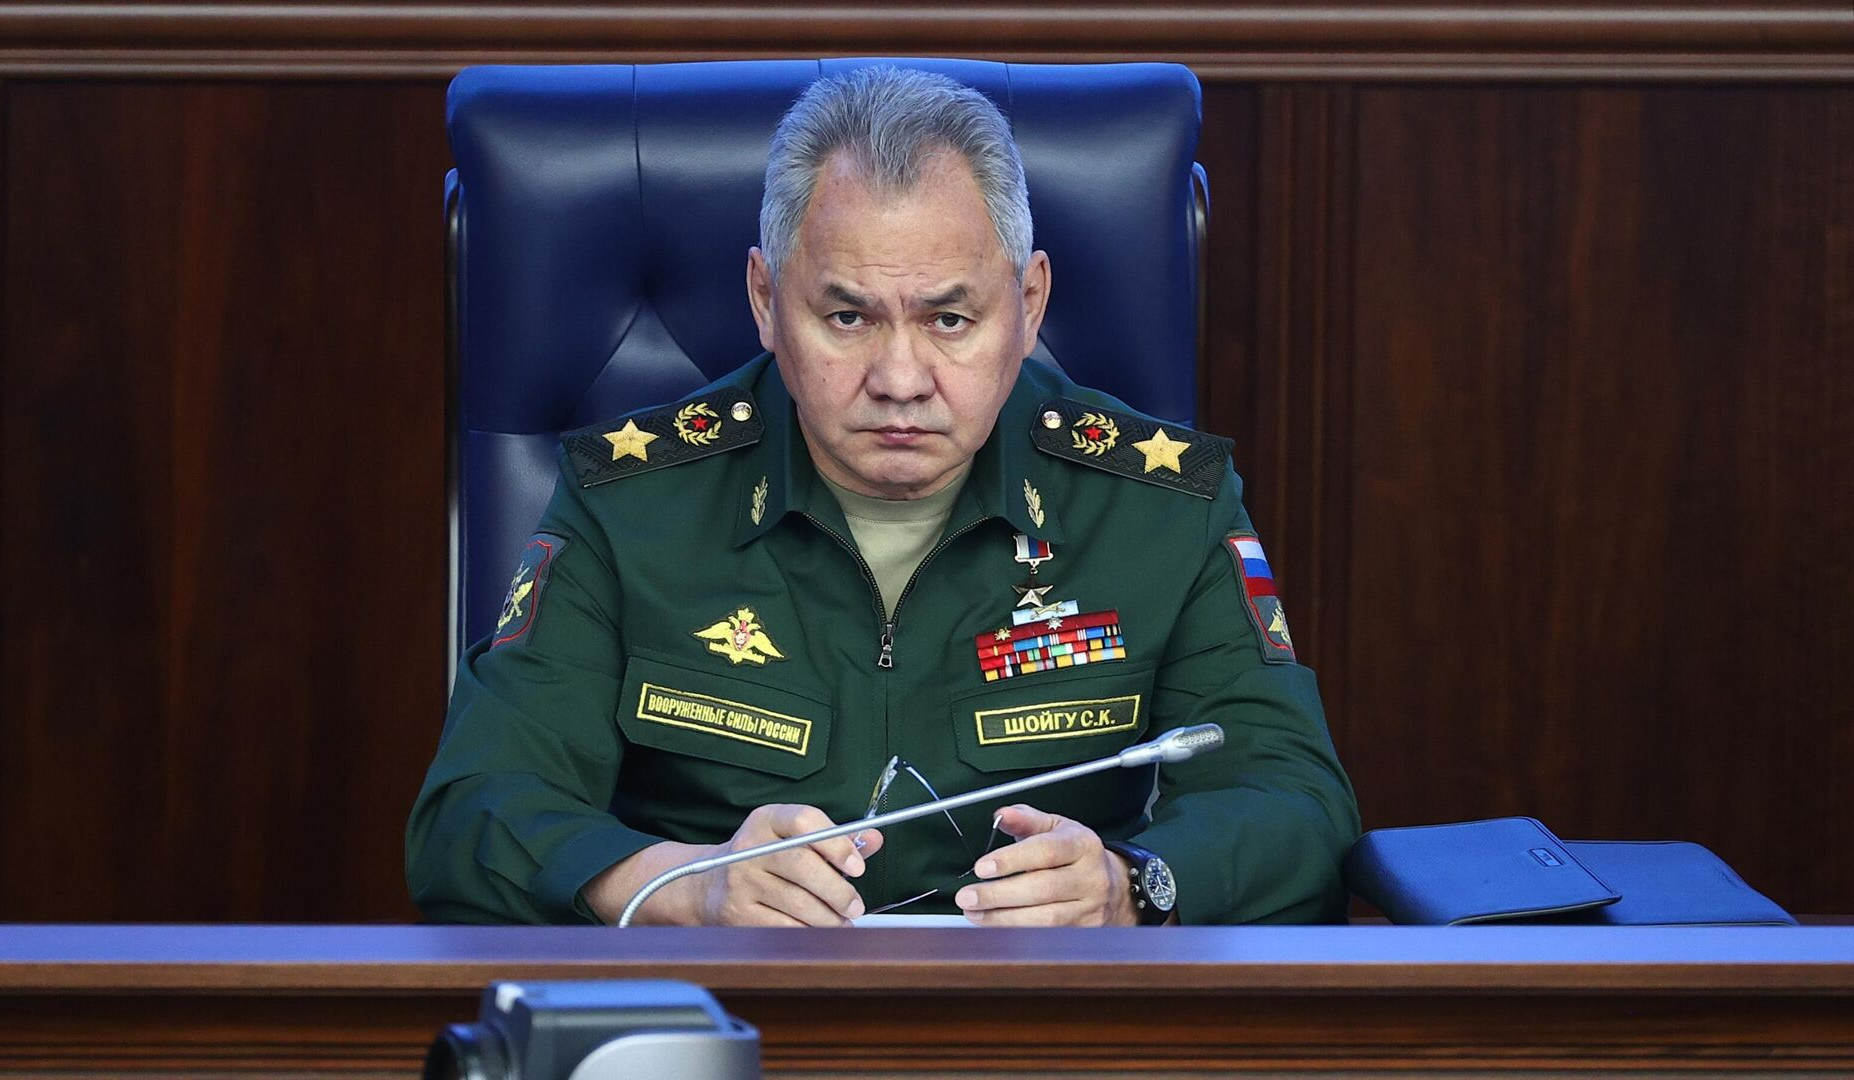 Shoigu calls the idea of banning Russians from entering EU “Nazi policy”